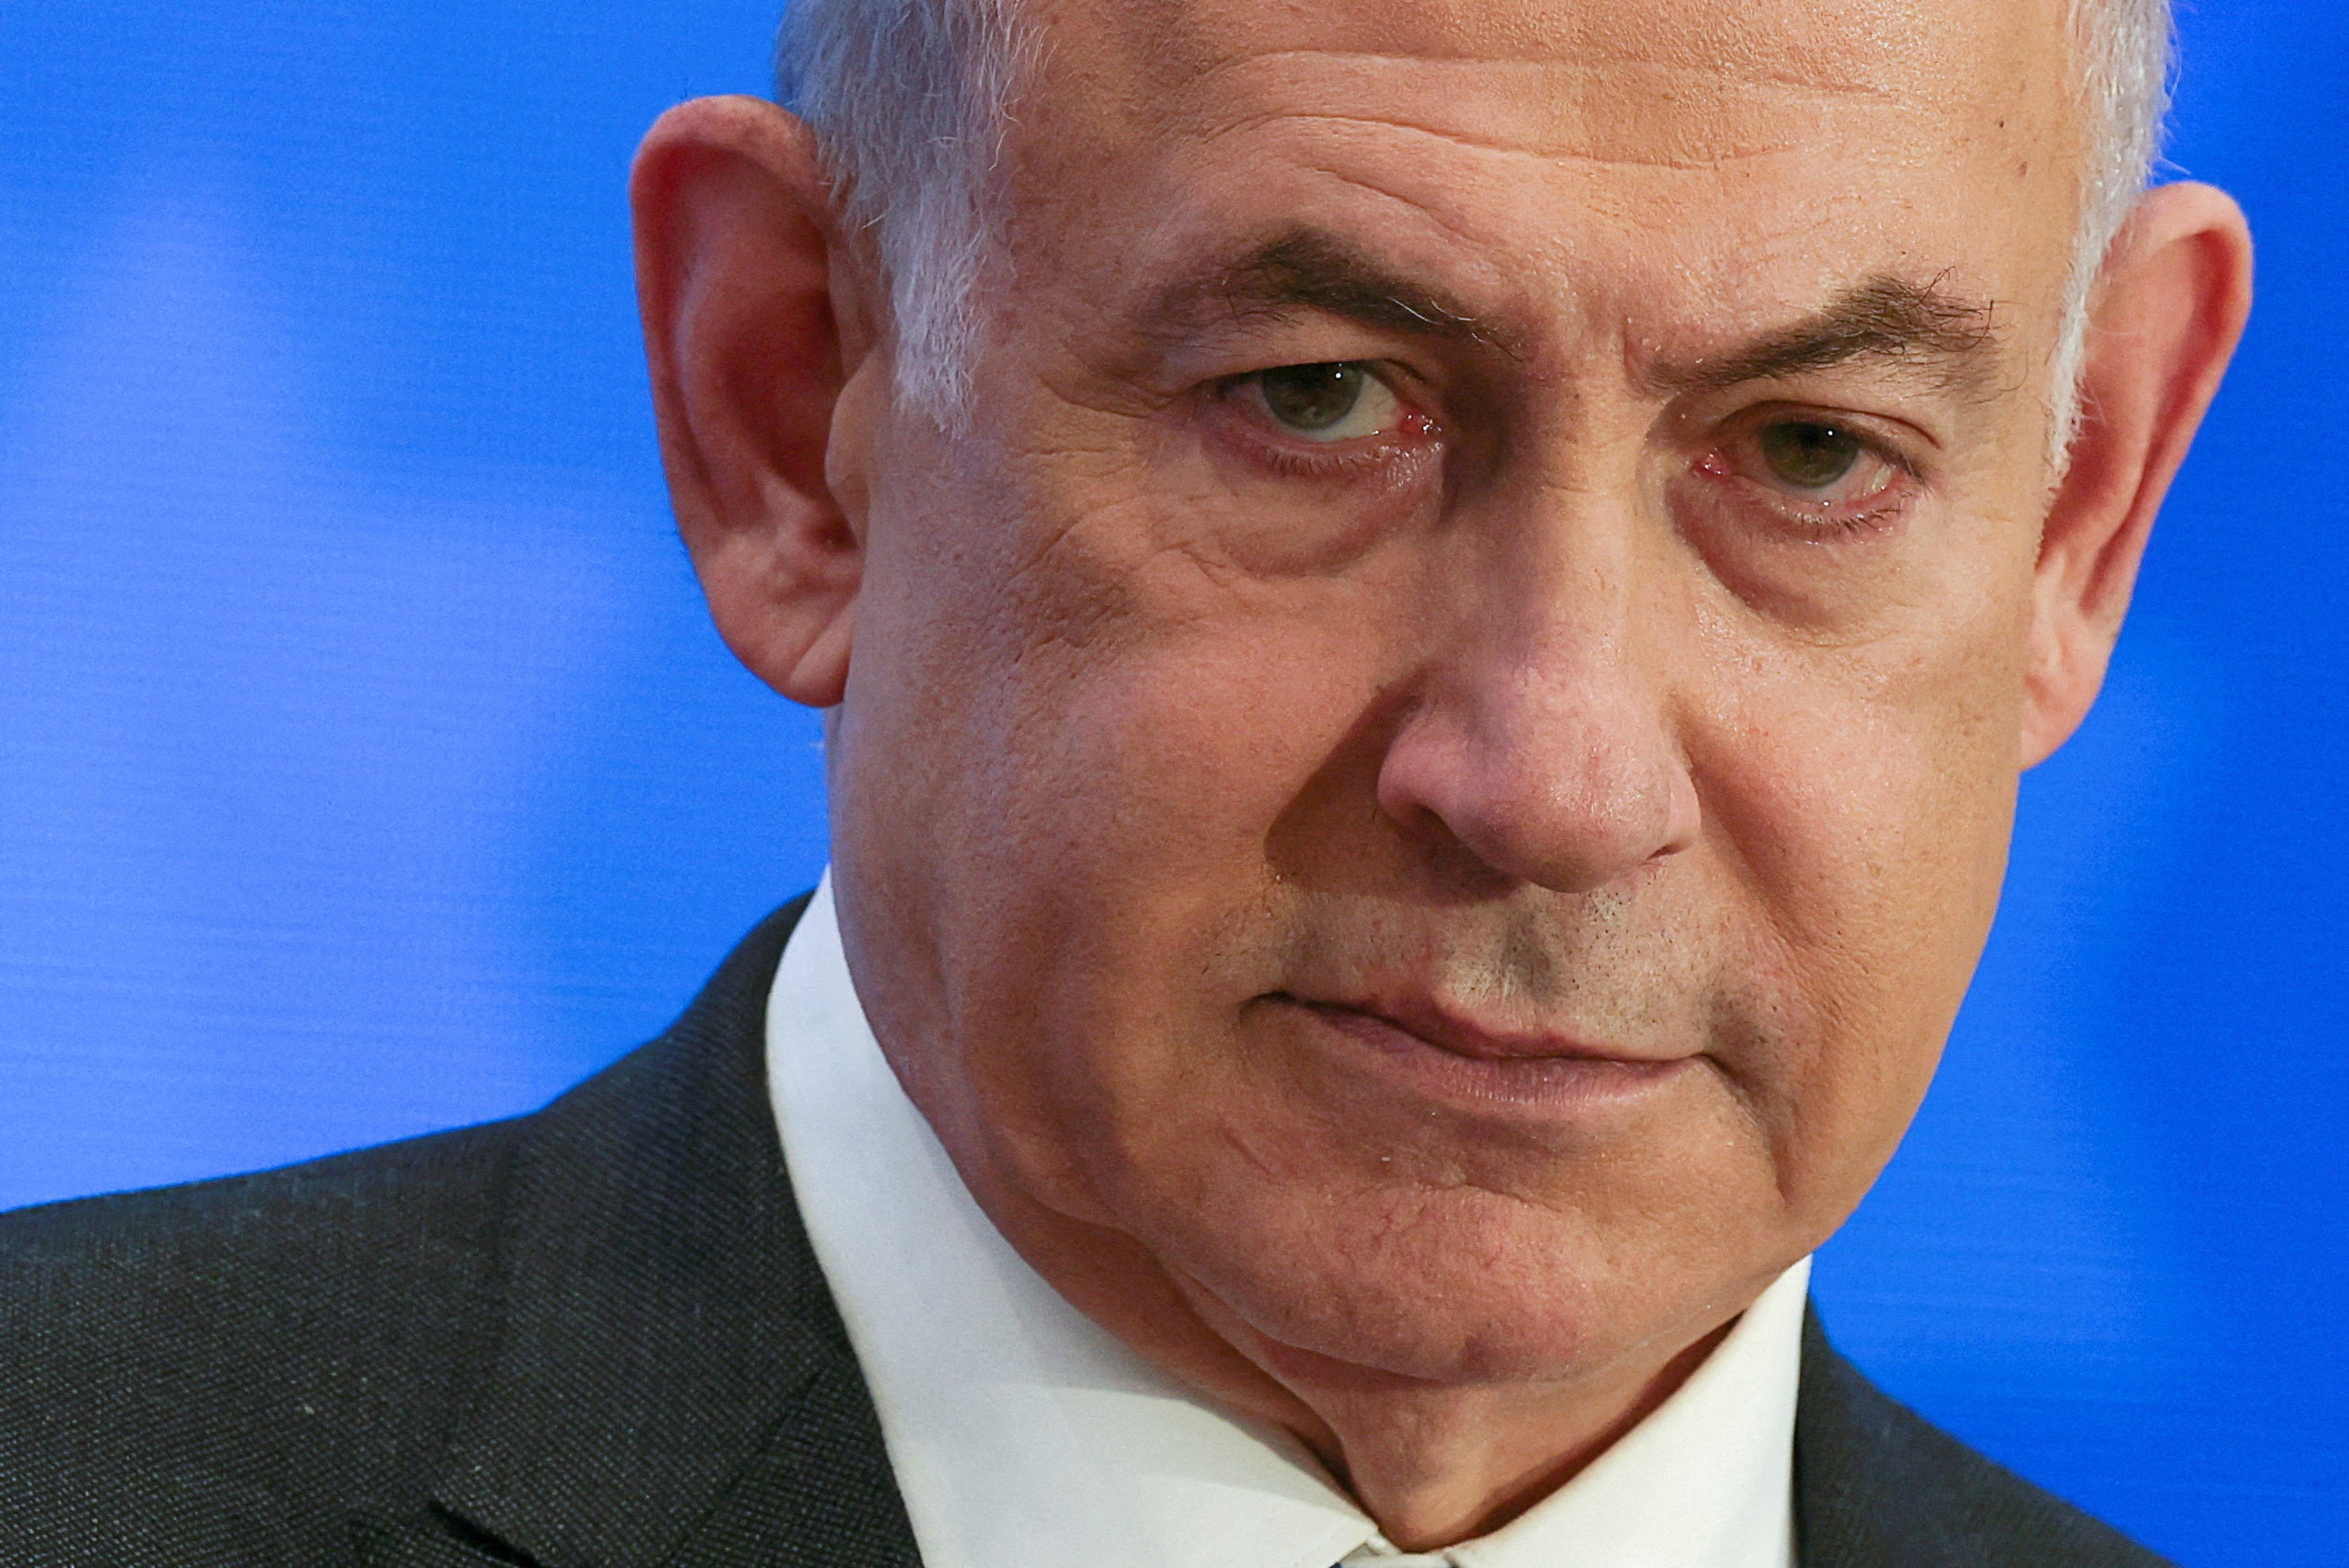 Israeli PM Benjamin Netanyahu has been tight-lipped about how Israel will respond to Iran’s attack last weekend